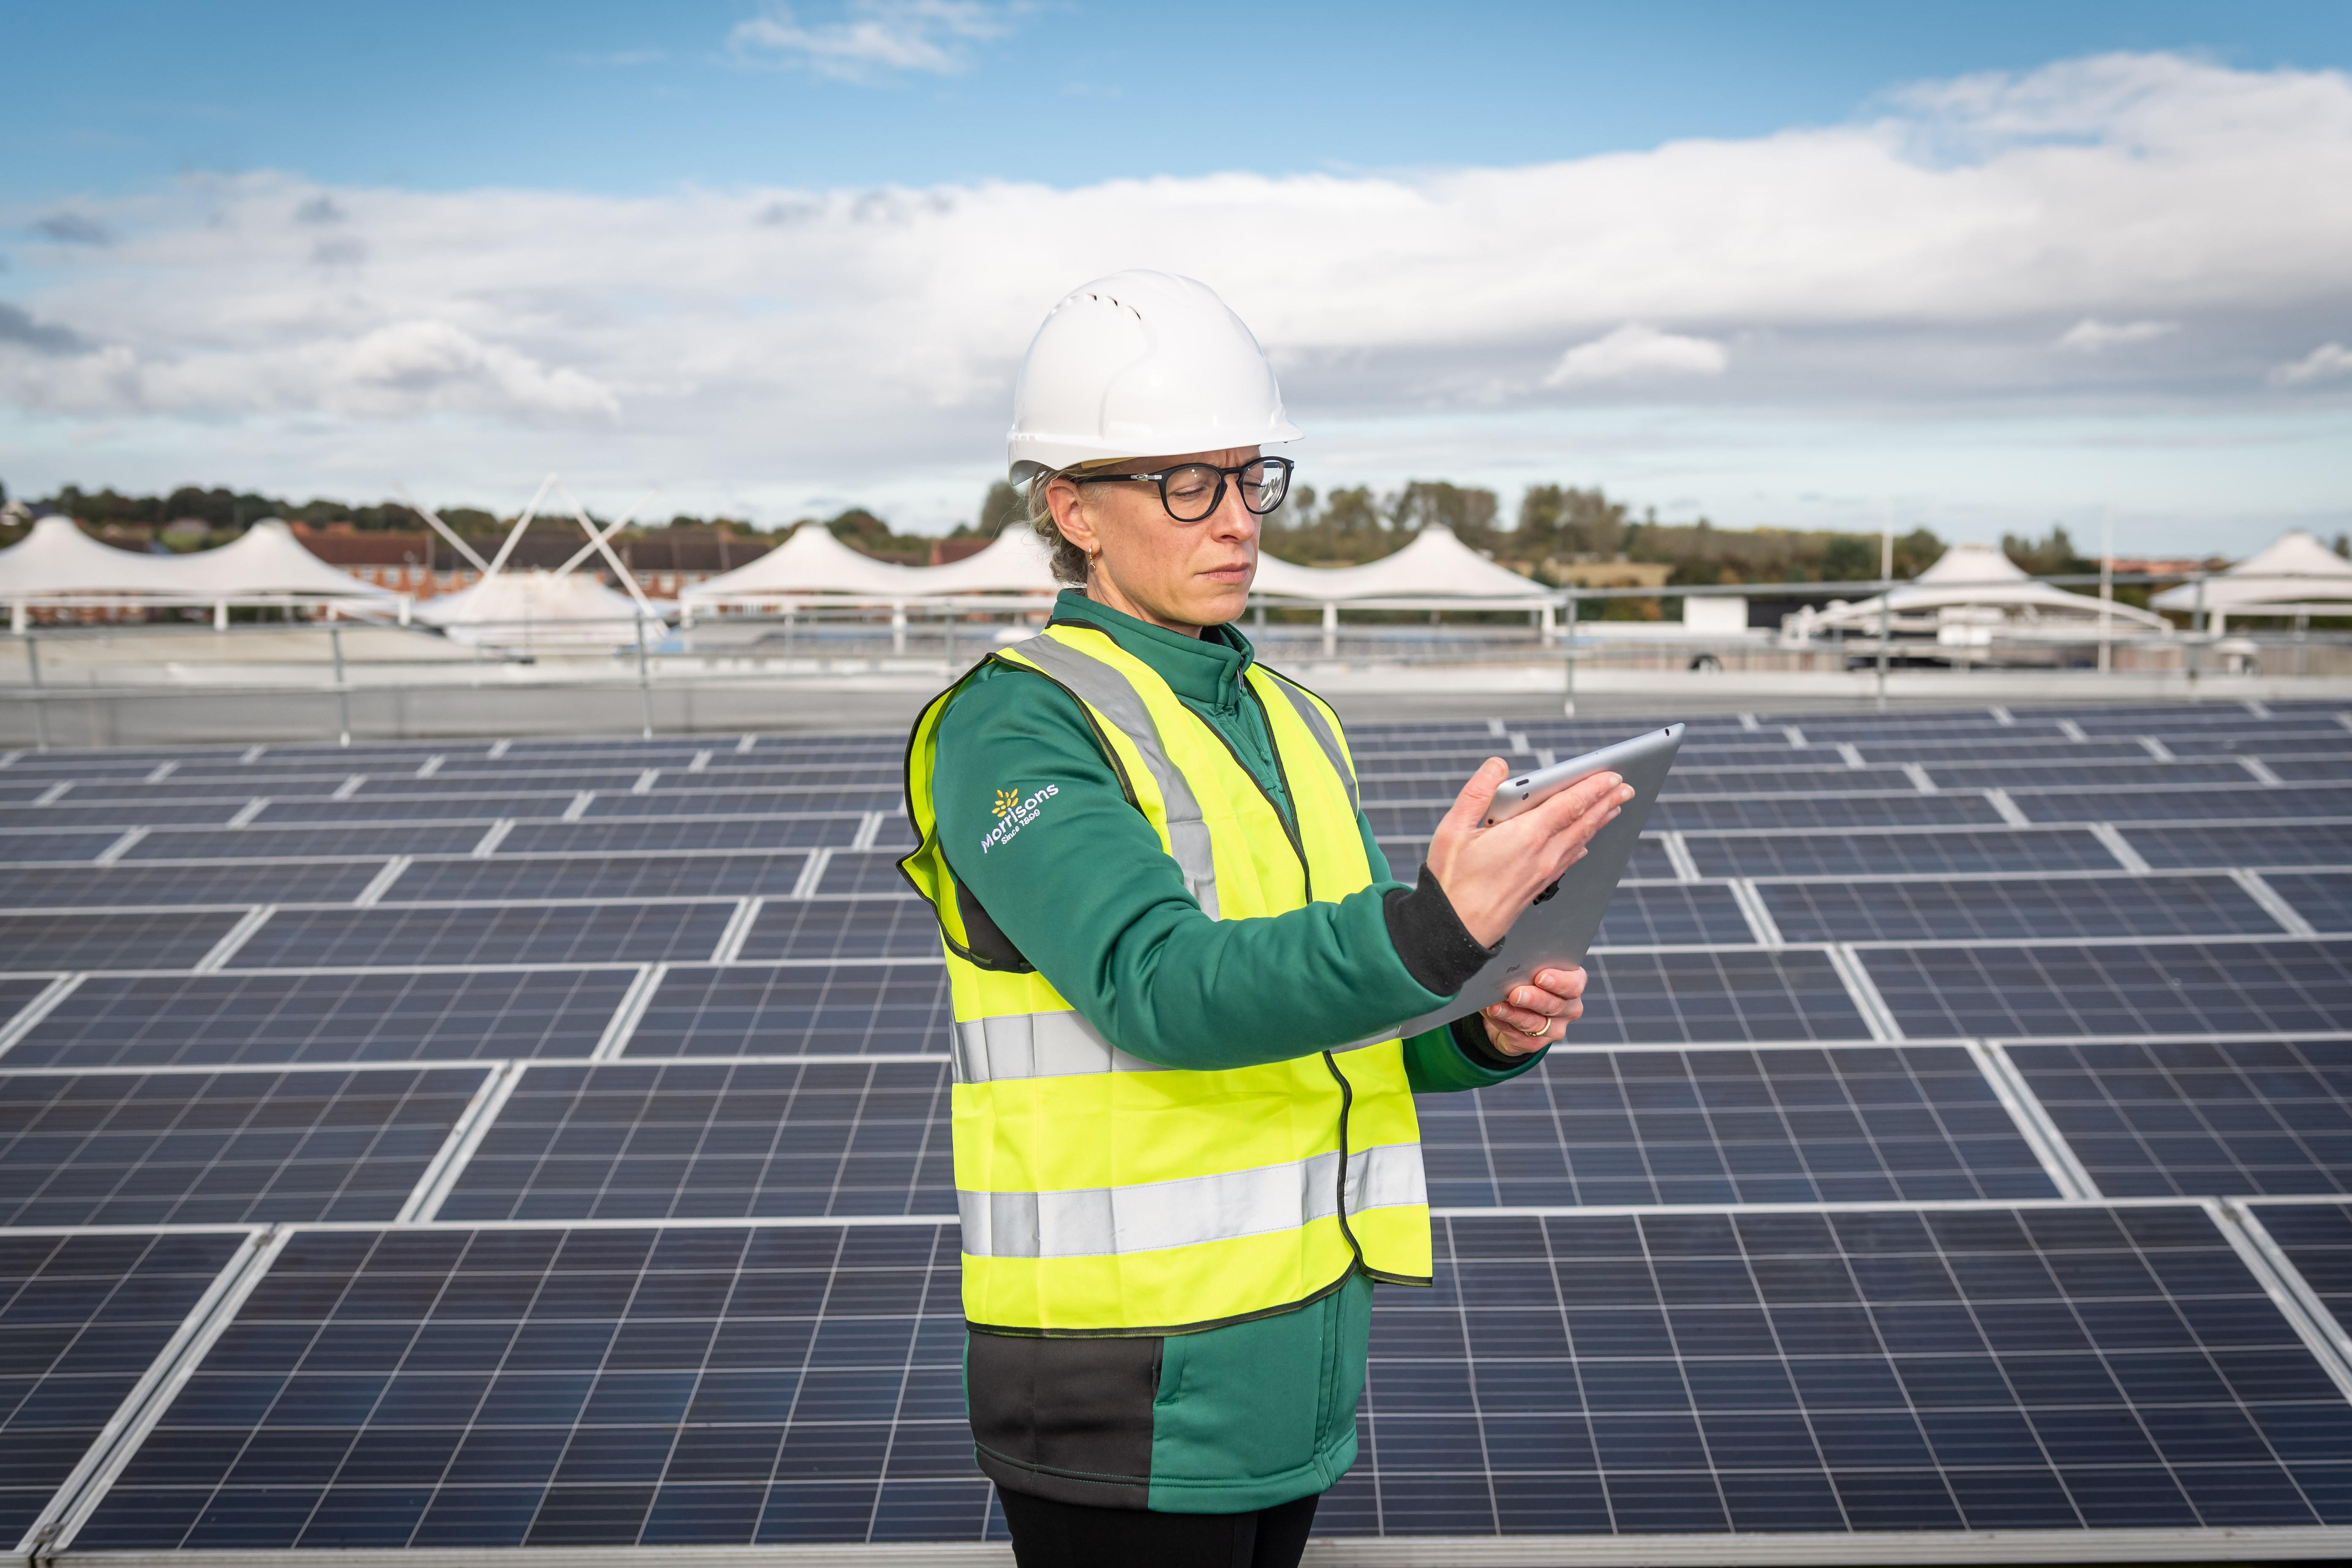 Morrisons commits to Net Zero Carbon Emissions from its own operations by 2035